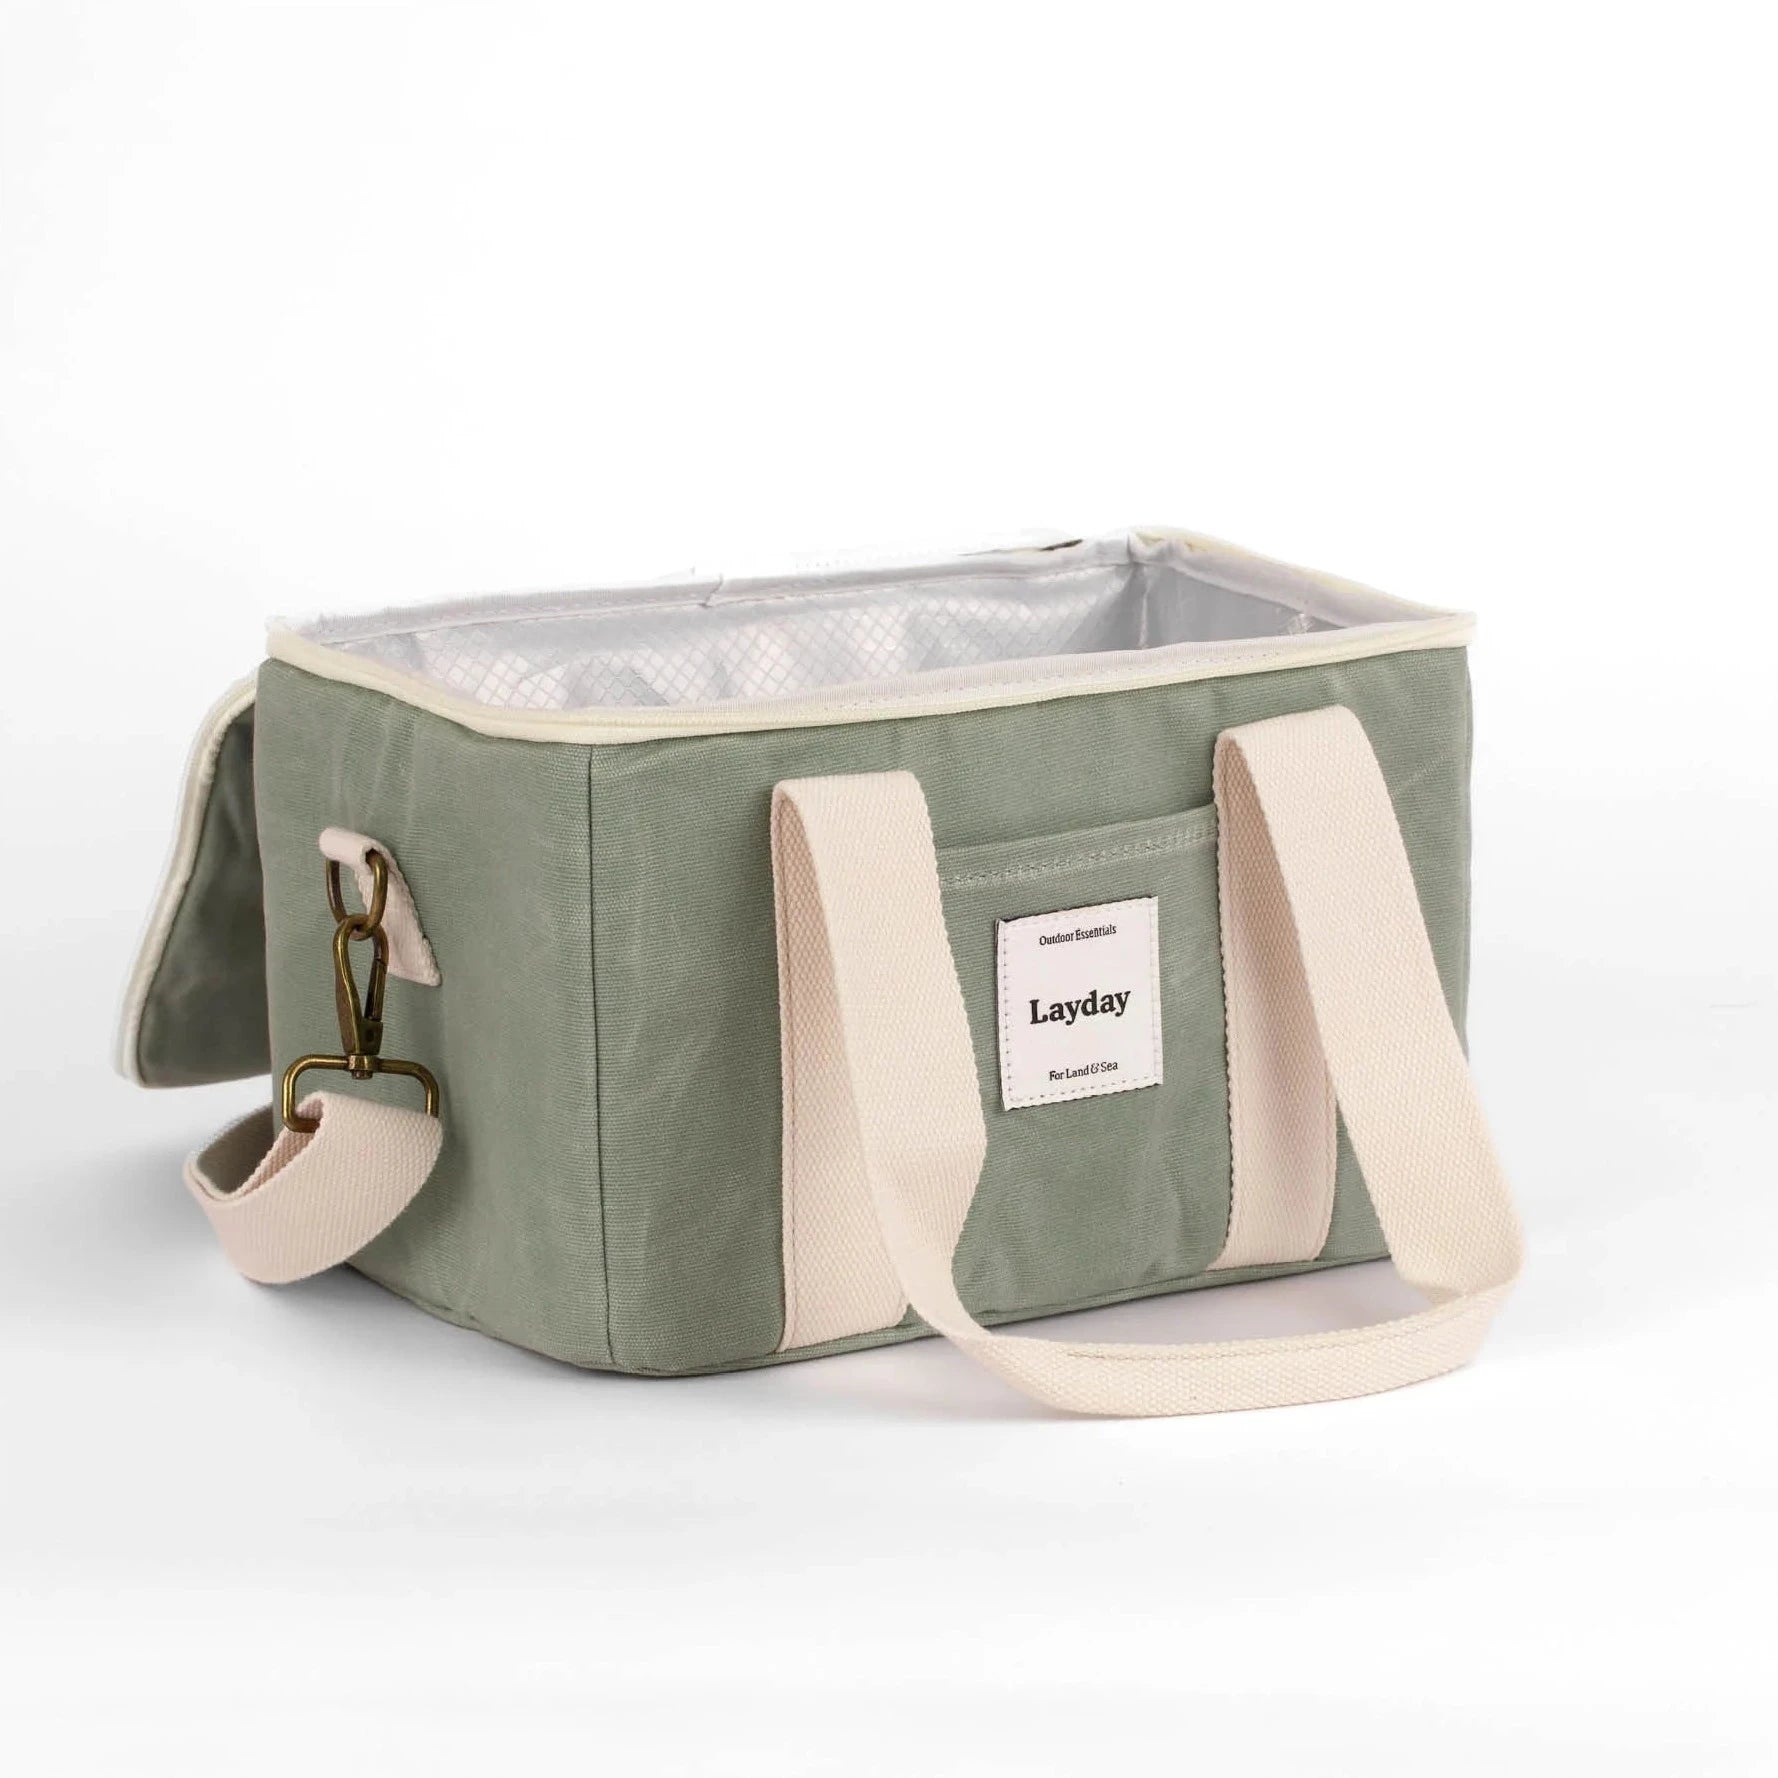 LAY DAY VOYAGE COOLER: SEAGRASS